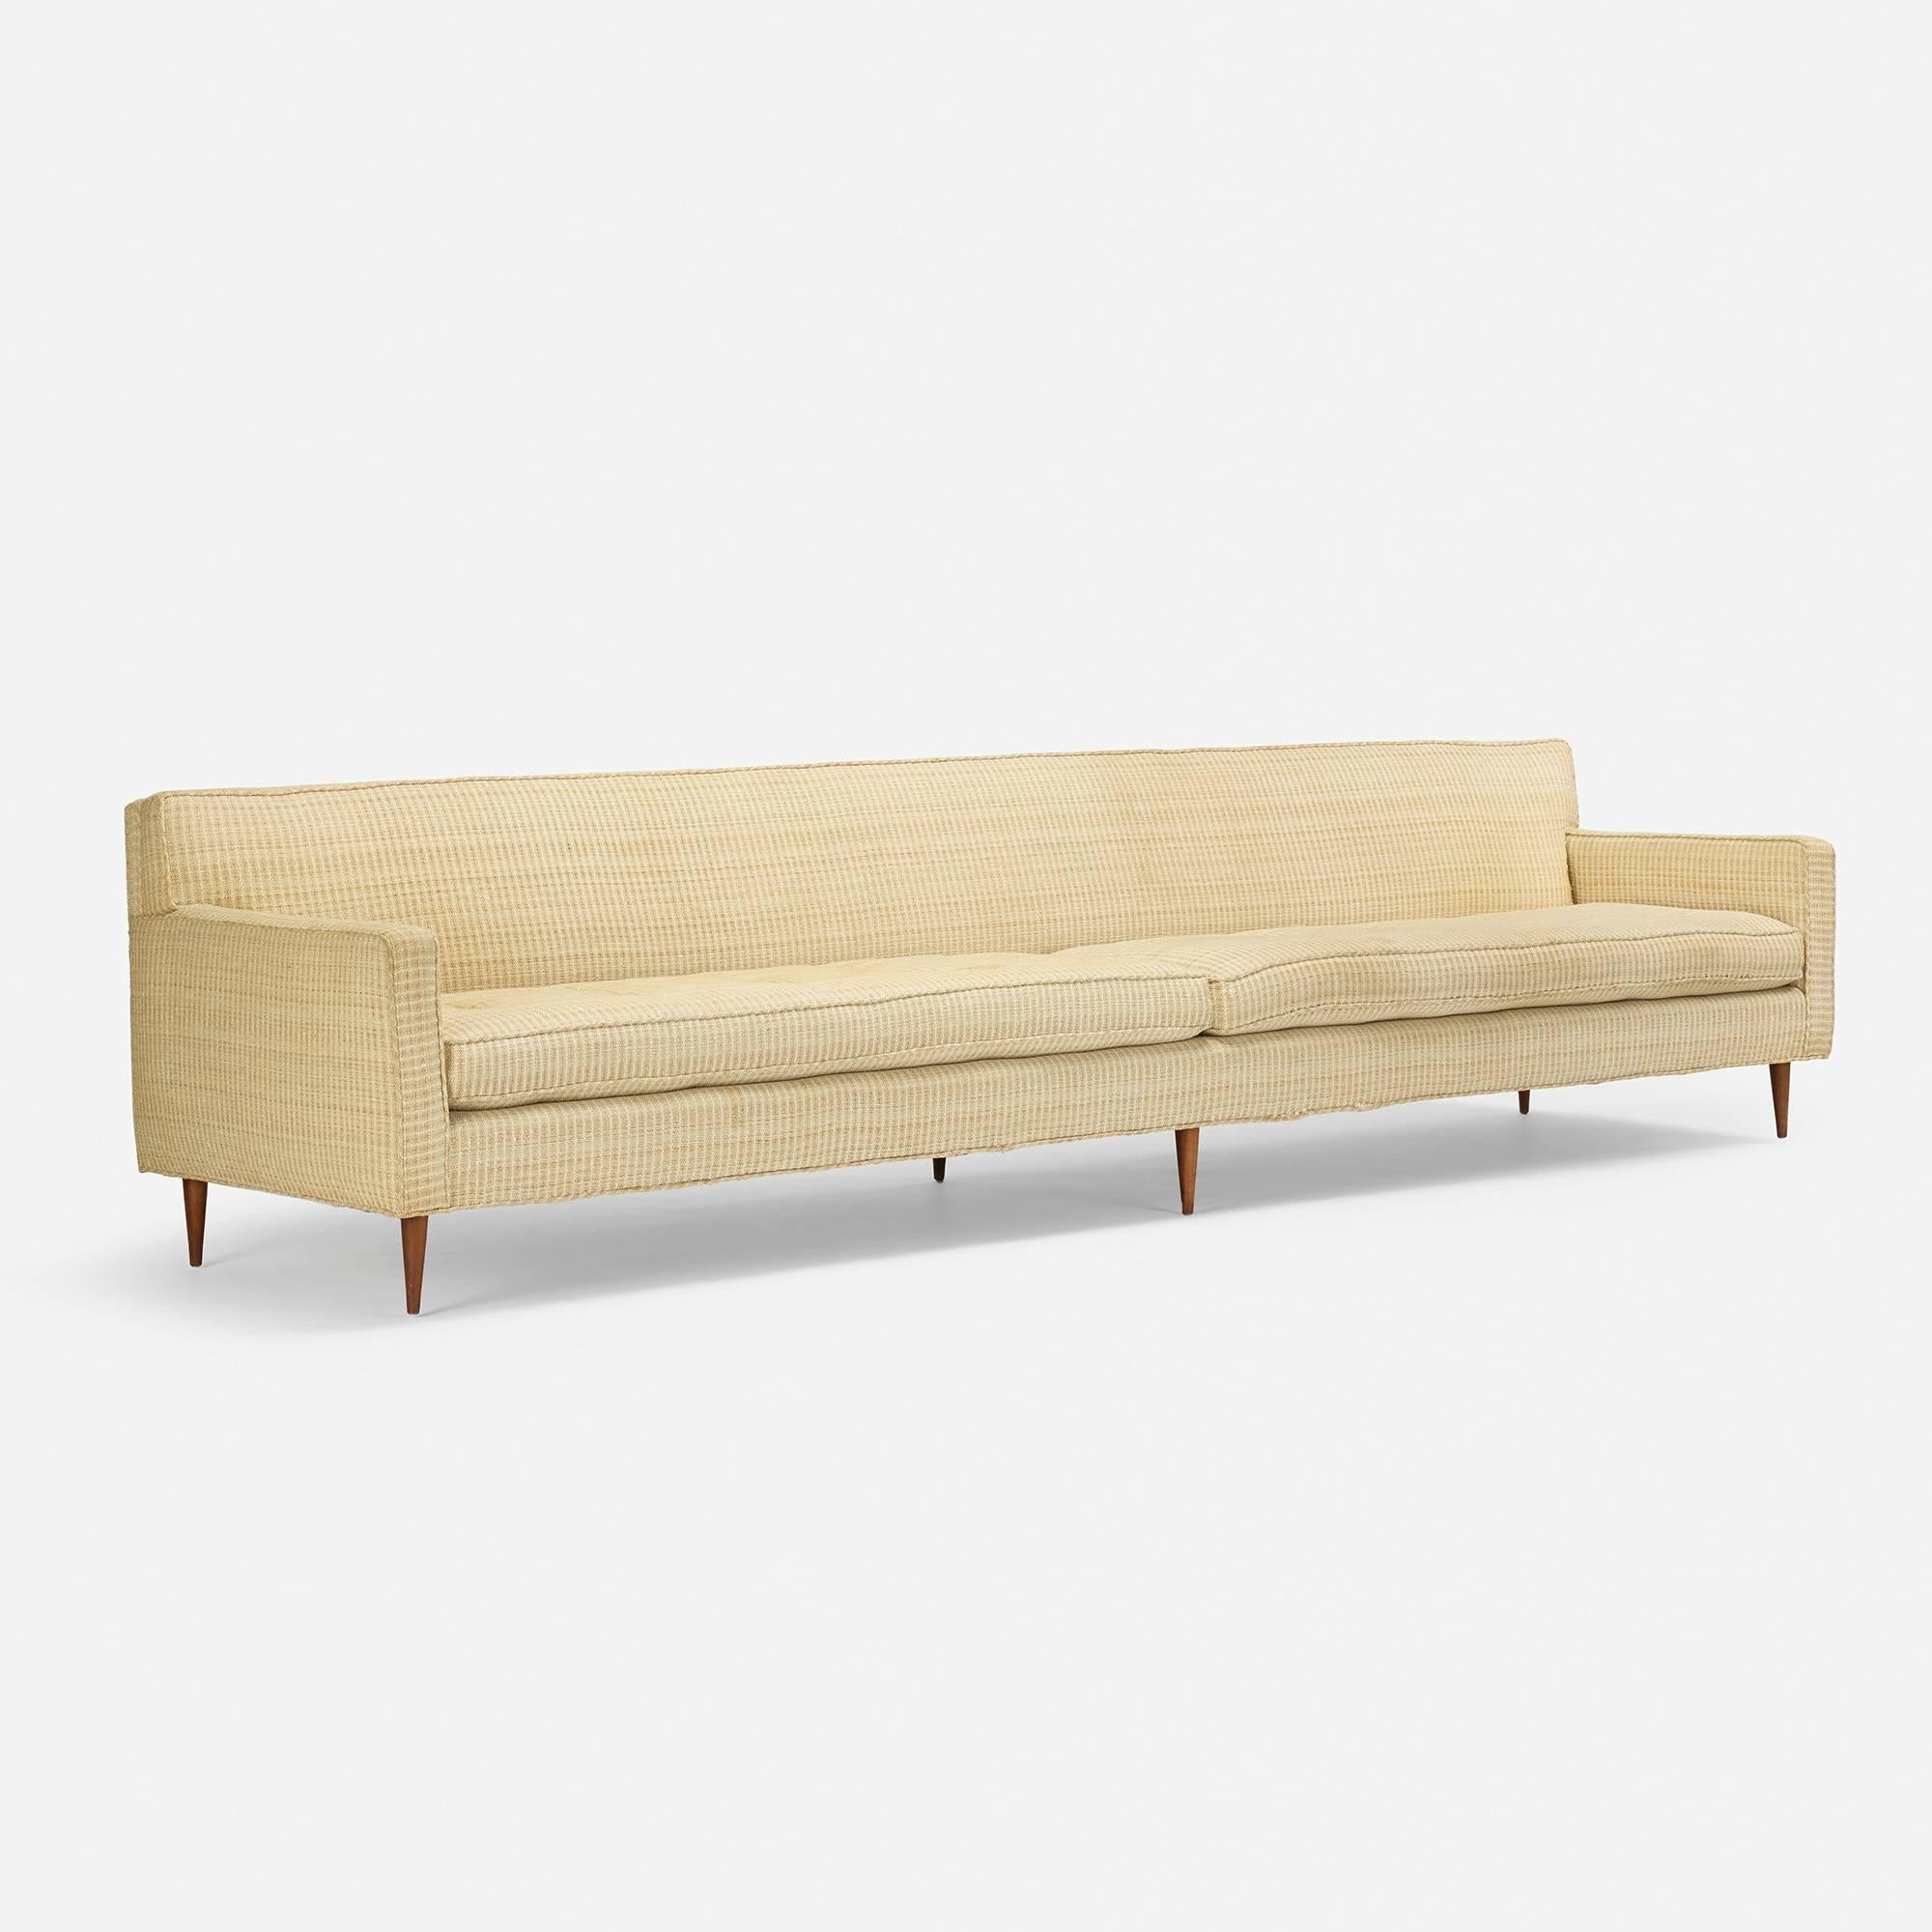 This custom sofa for Directional features an extra-long length at 122